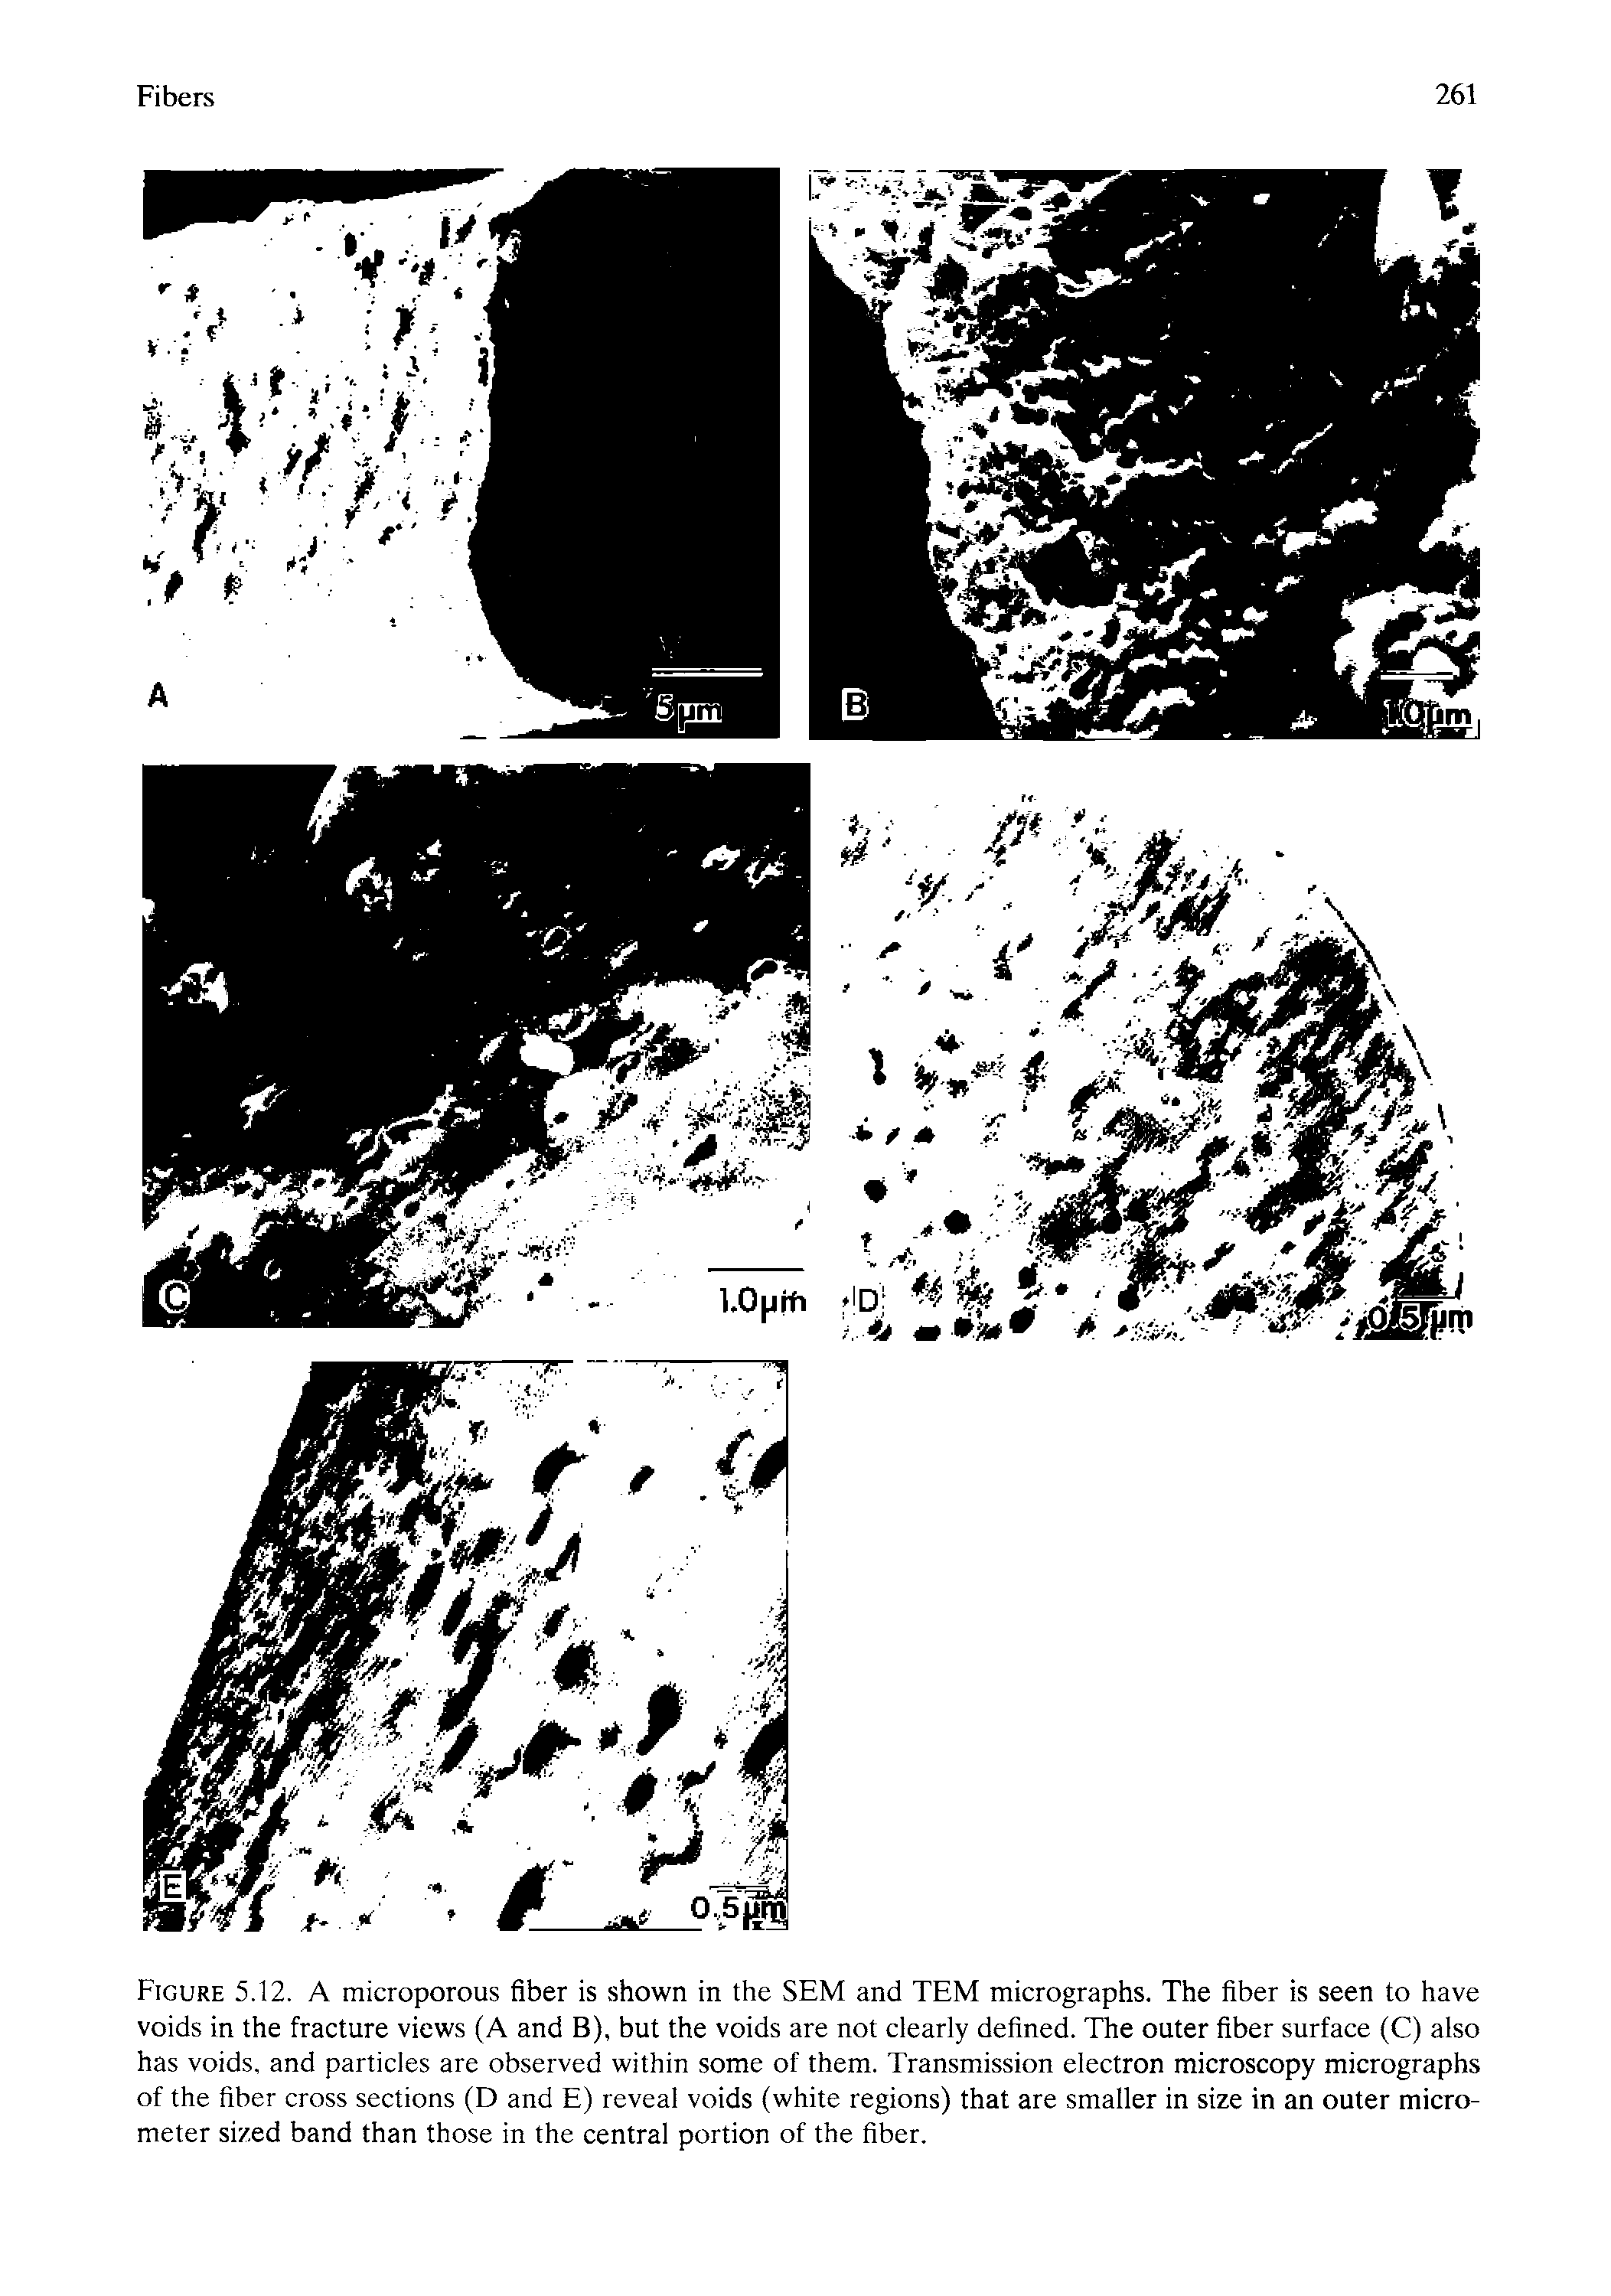 Figure 5.12. A microporous fiber is shown in the SEM and TEM micrographs. The fiber is seen to have voids in the fracture views (A and B), but the voids are not clearly defined. The outer fiber surface (C) also has voids, and particles are observed within some of them. Transmission electron microscopy micrographs of the fiber cross sections (D and E) reveal voids (white regions) that are smaller in size in an outer micrometer sized band than those in the central portion of the fiber.